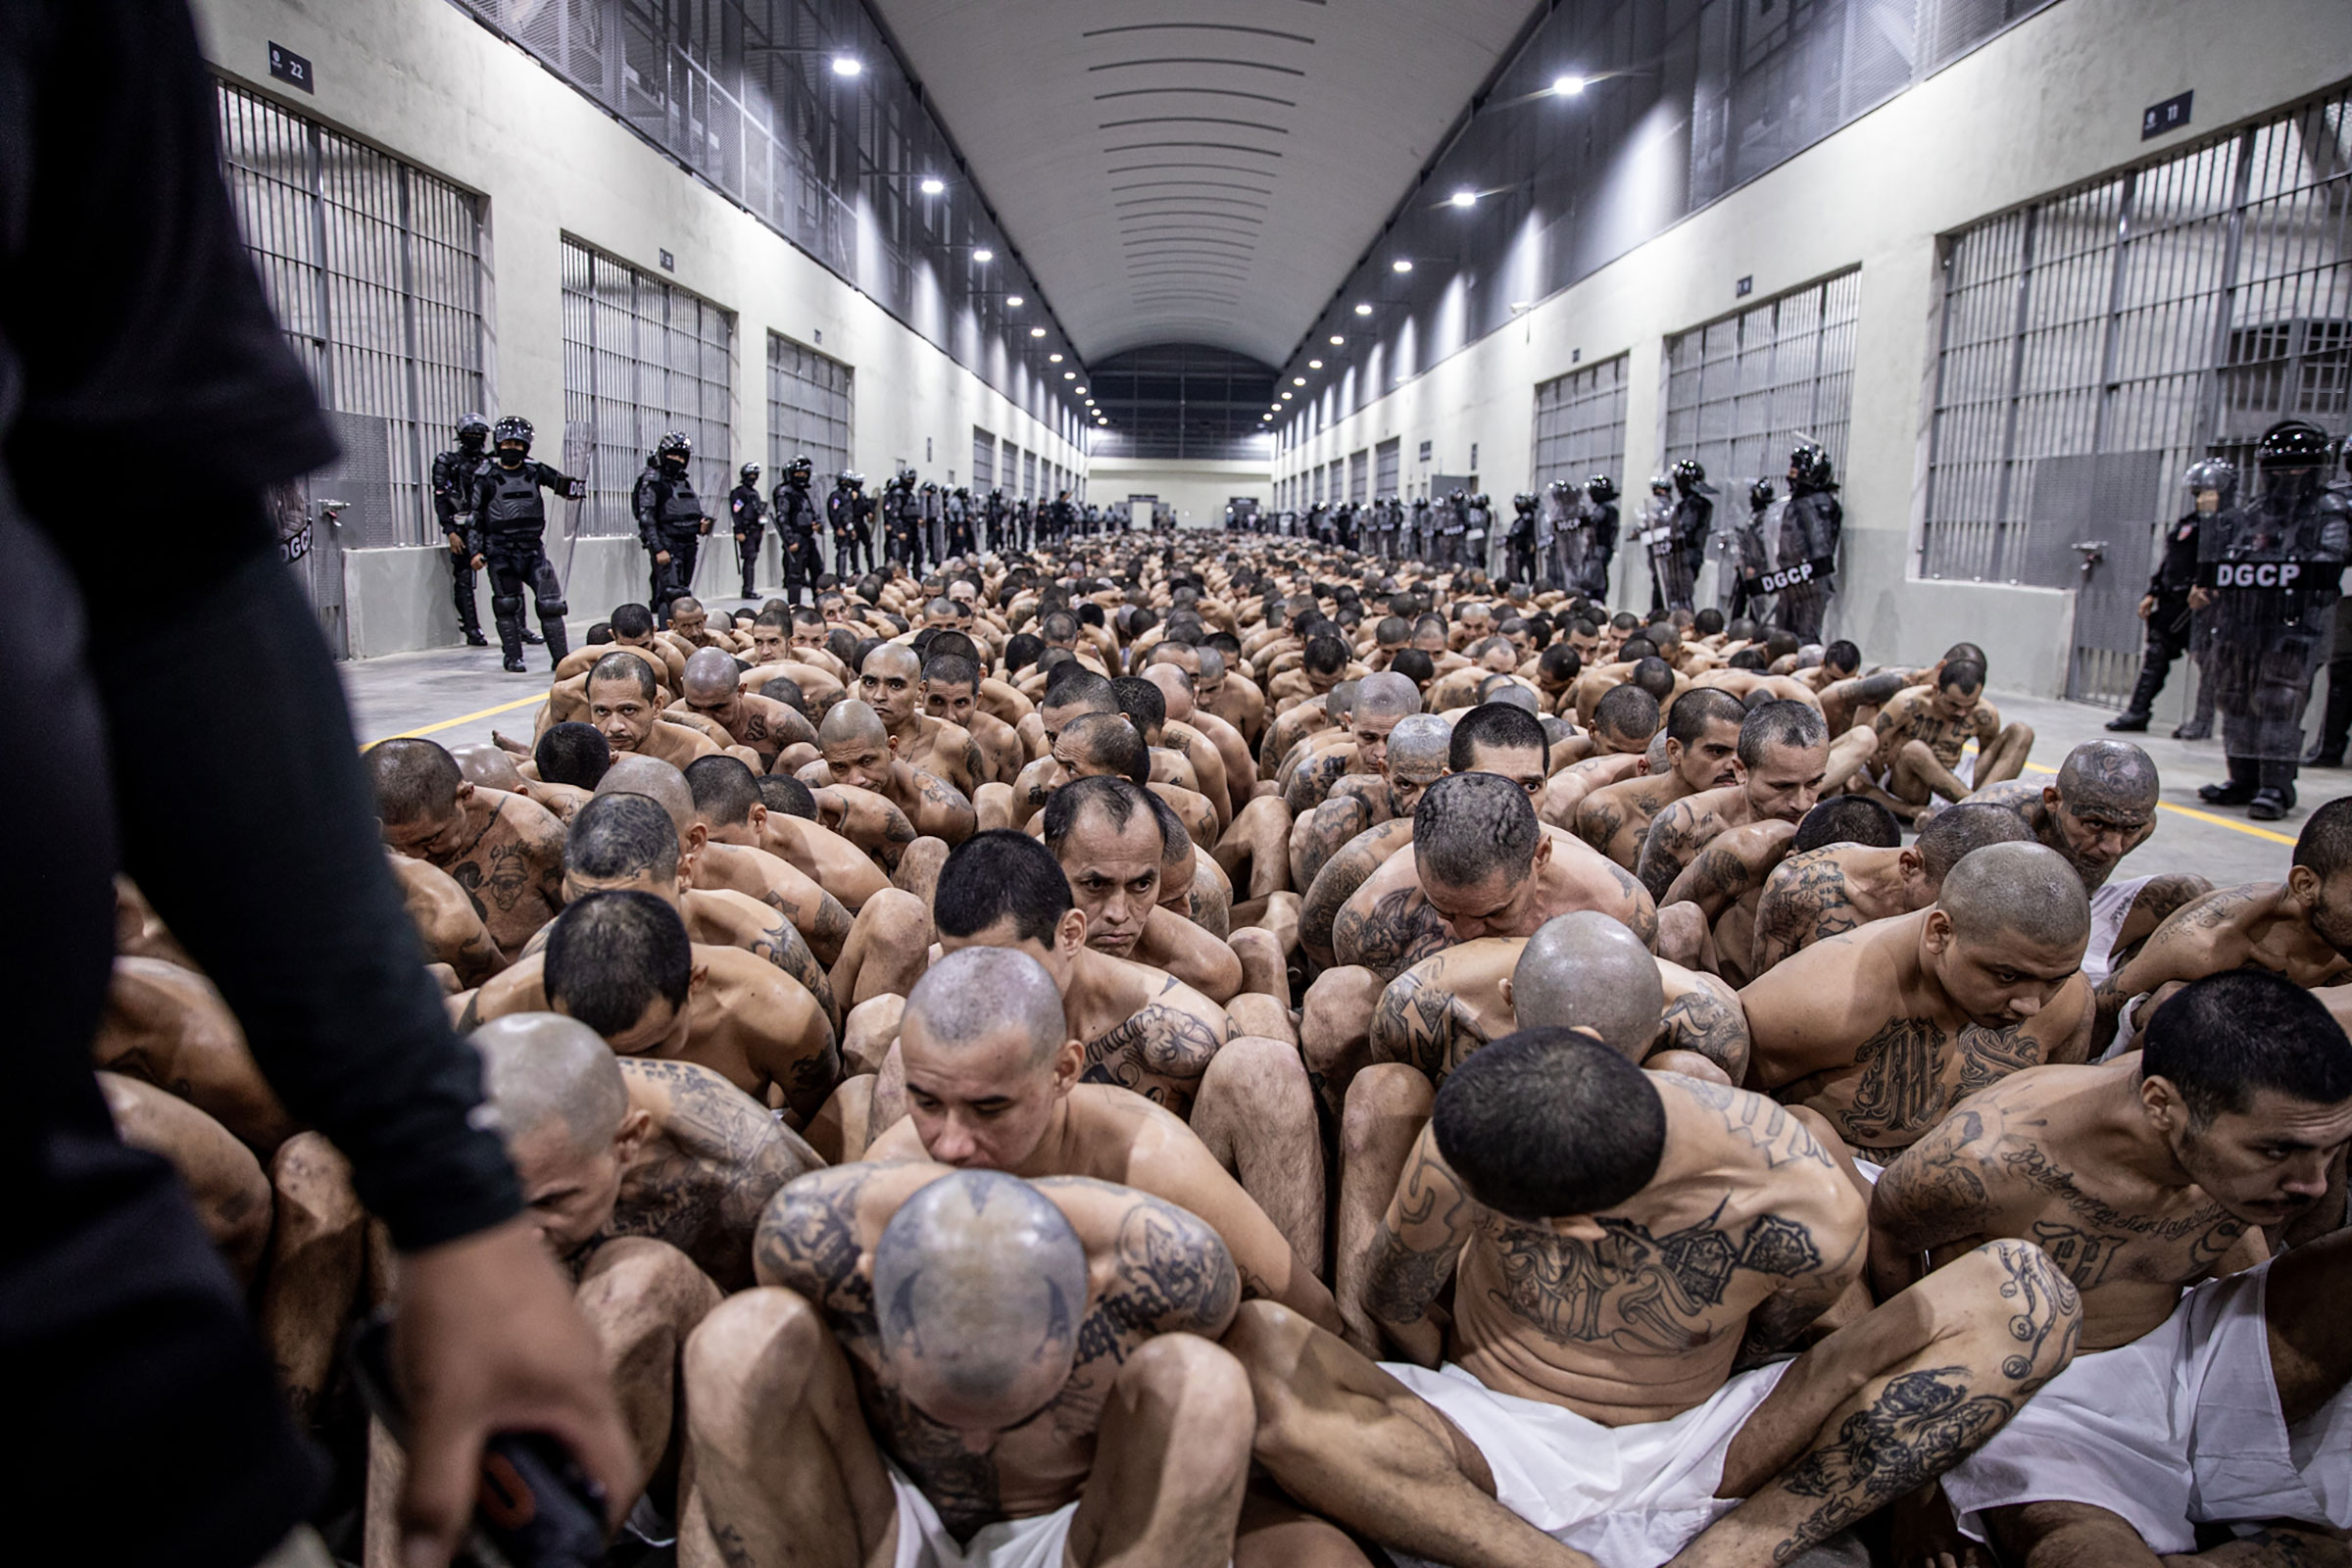 A second group of 2,000 detainees are moved to the mega-prison Terrorist Confinement Centre (CECOT) in Tecoluca, El Salvador on March 15, 2023. (Presidencia El Salvador/Getty Images)